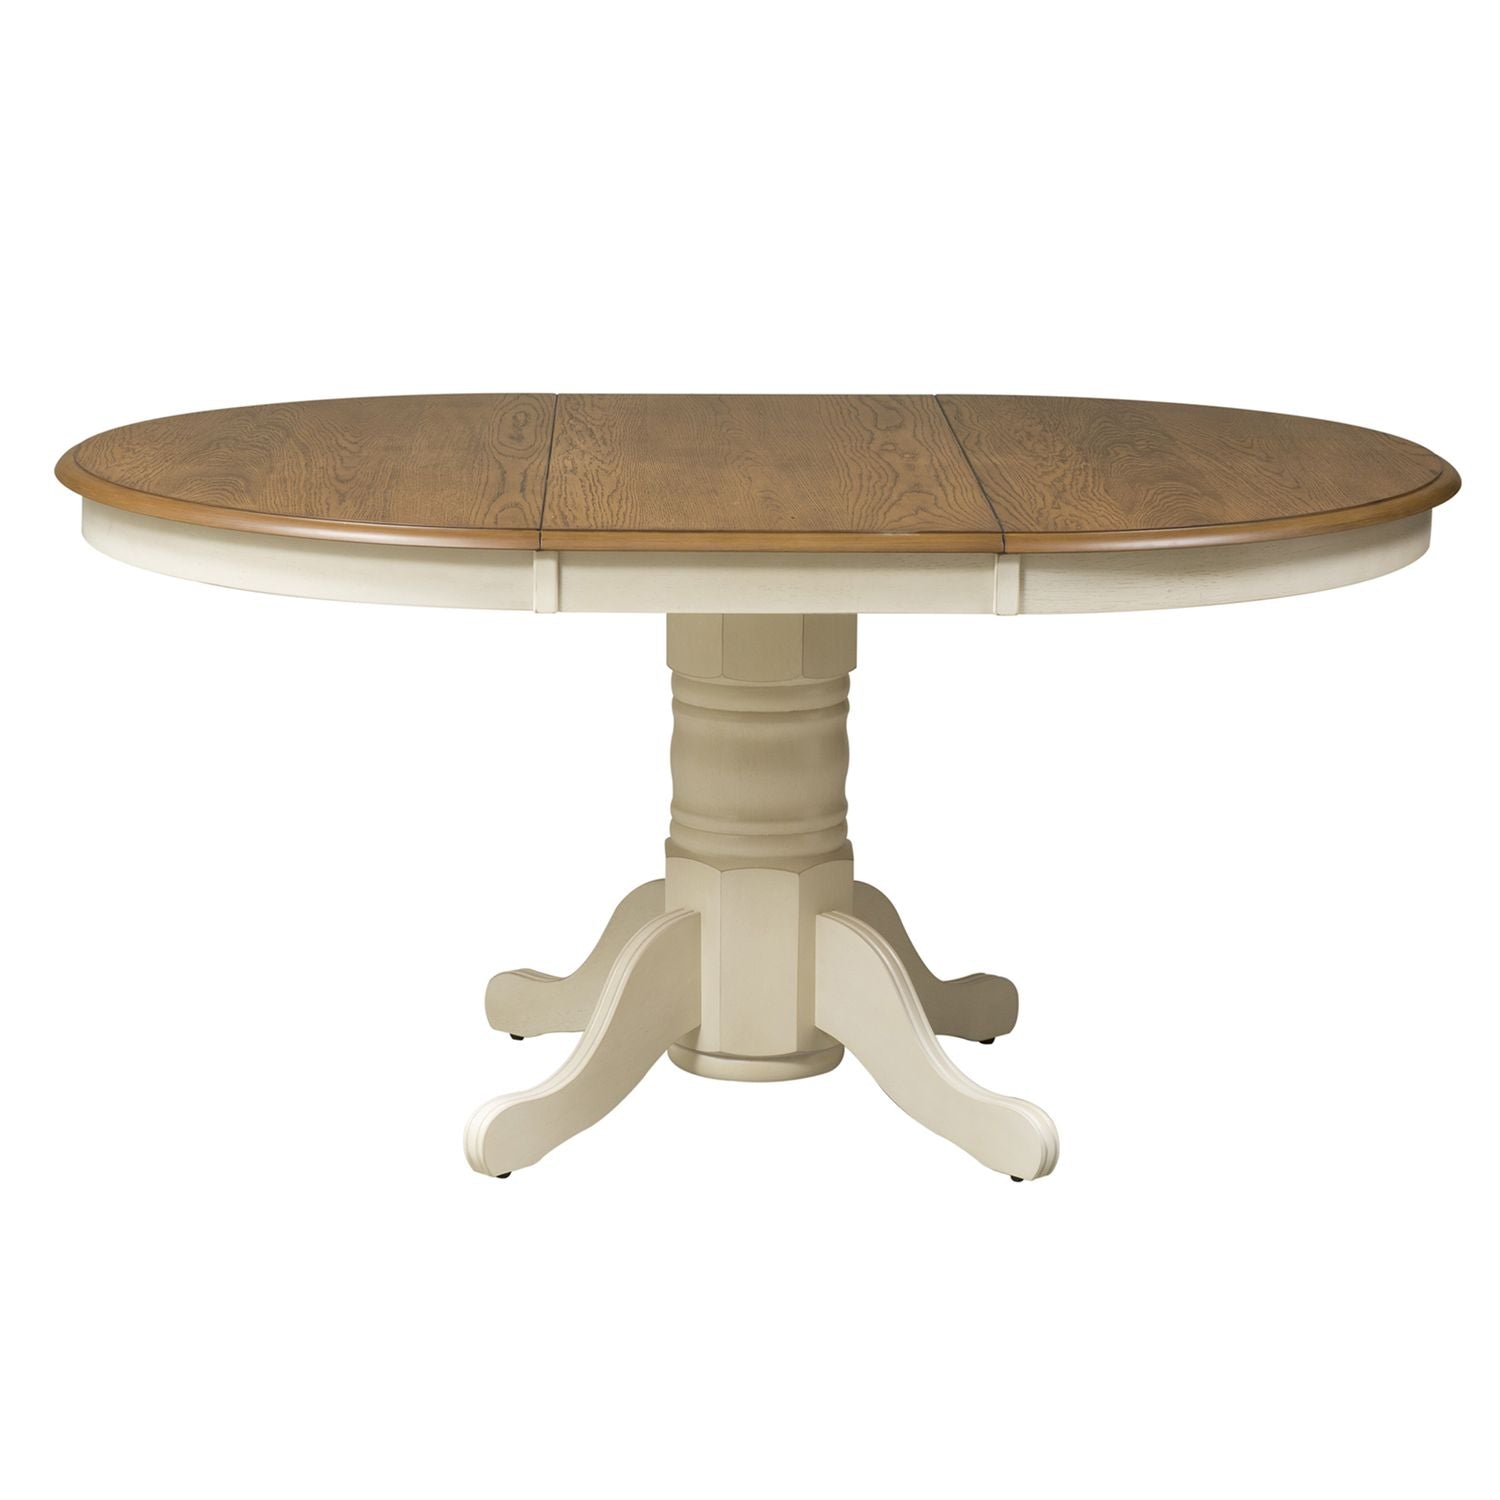 Springfield / 7 Piece Pedestal Table Set by Liberty Furniture